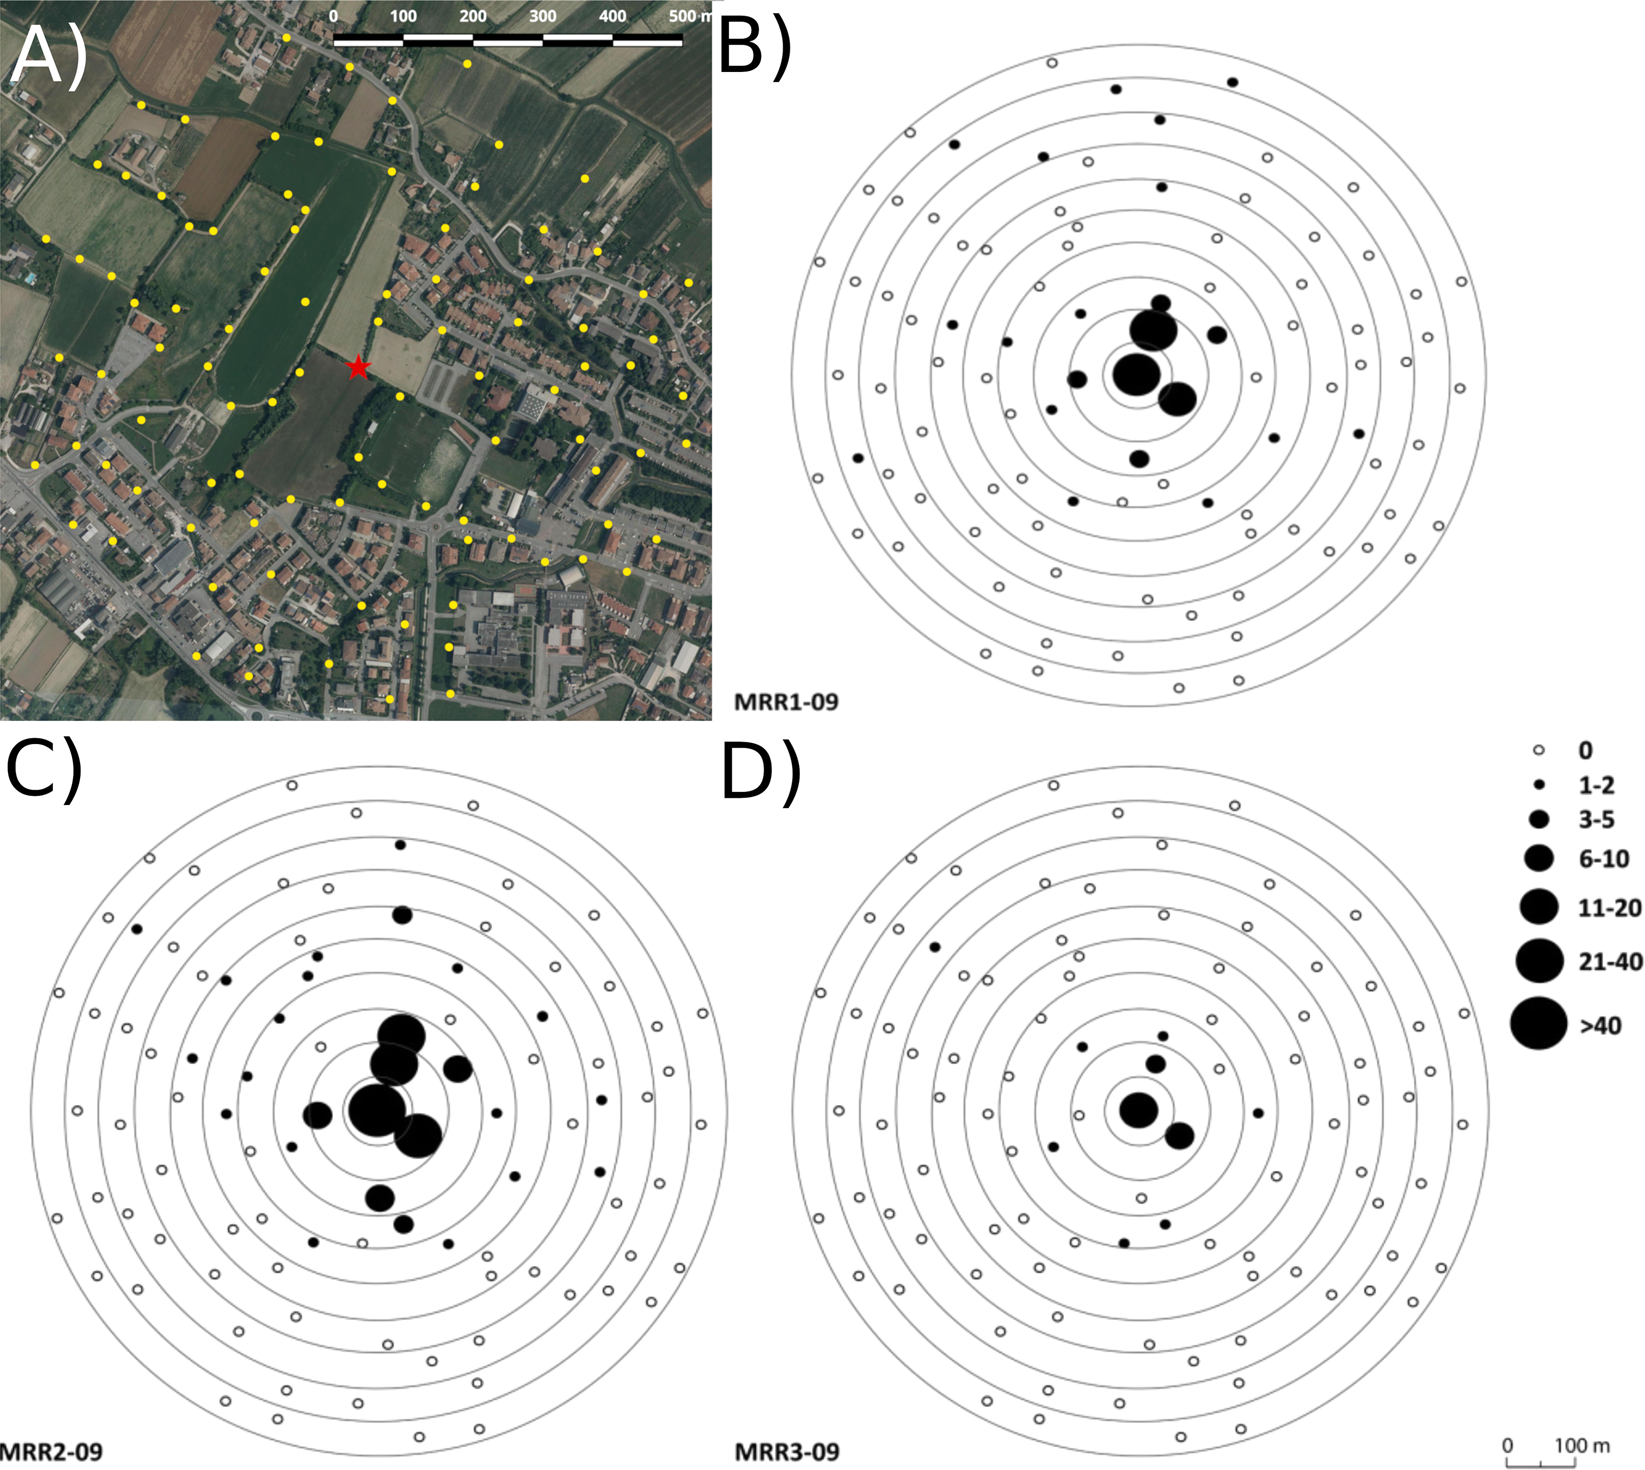 Estimating Spatio-Temporal Dynamics of Aedes Albopictus Dispersal to Guide  Control Interventions in Case of Exotic Arboviruses in Temperate Regions |  Scientific Reports